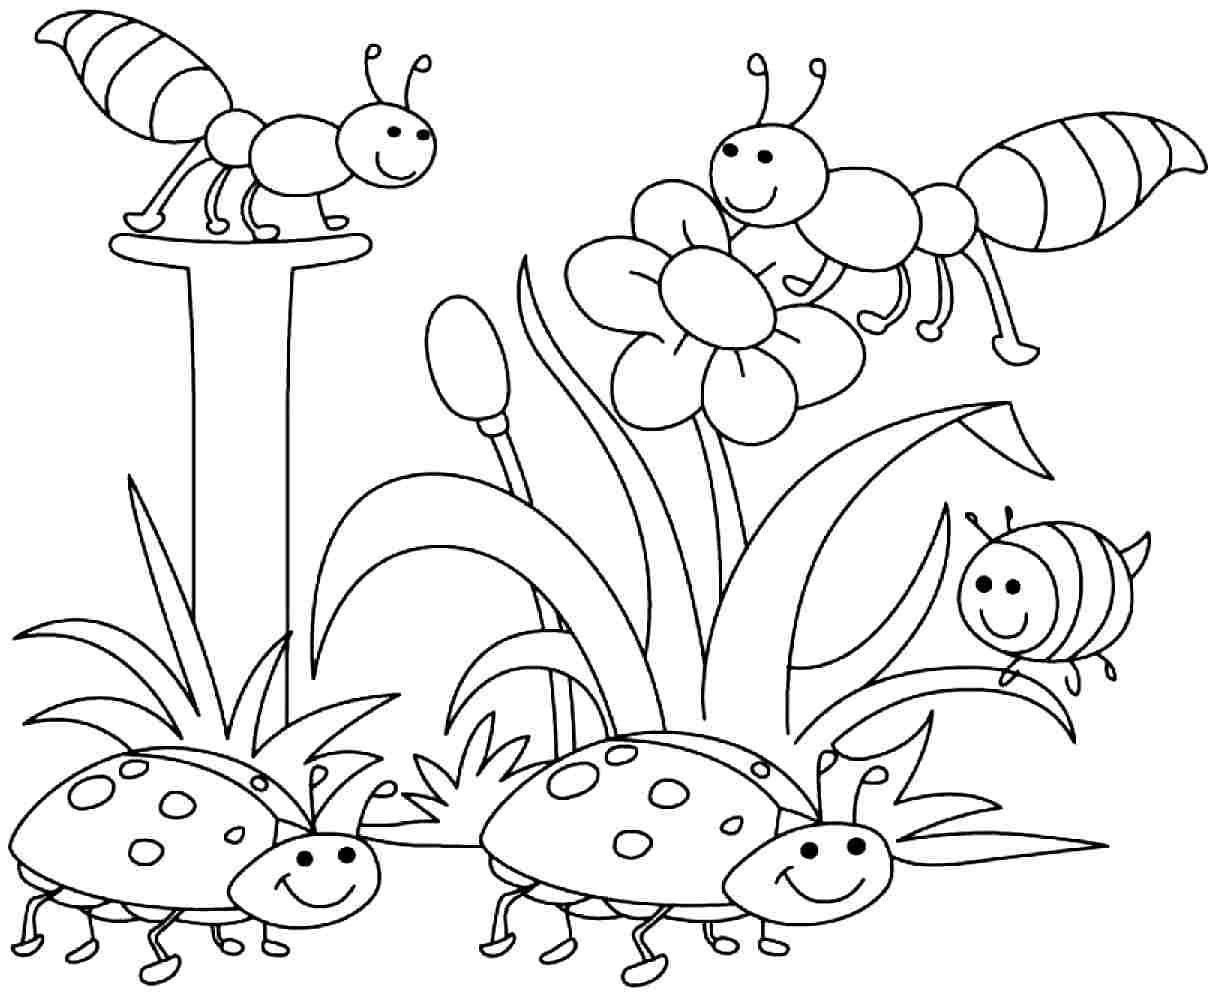 Spring Kids Coloring Pages
 5 Best of Spring Season Coloring Pages Printable